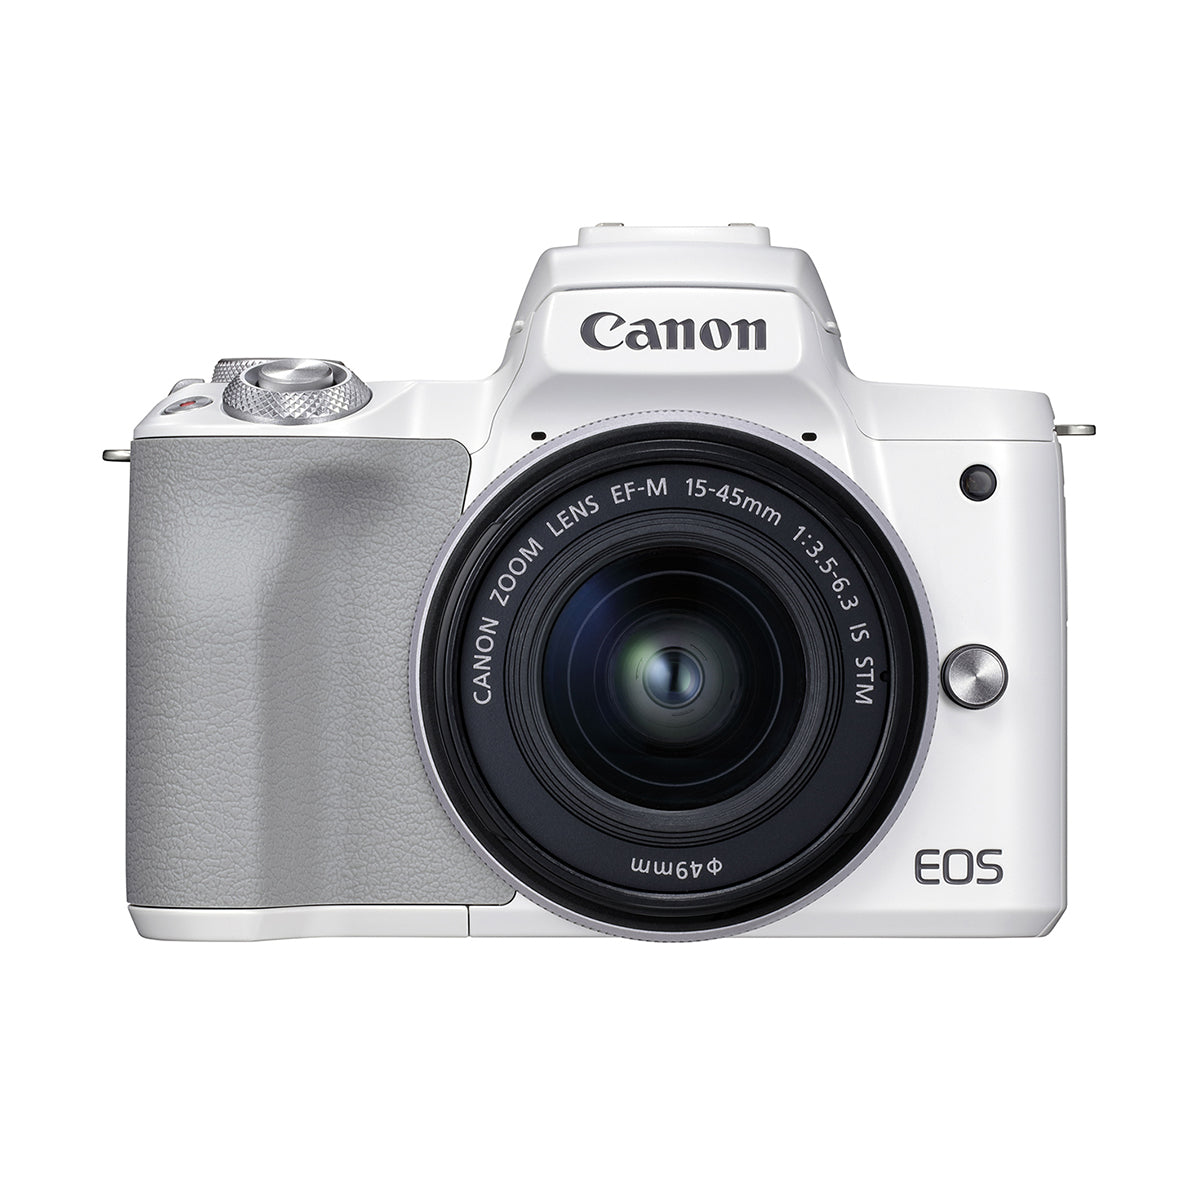 Canon EOS M50 Mark II with EF-M 15-45mm IS STM Lens Kit (White)